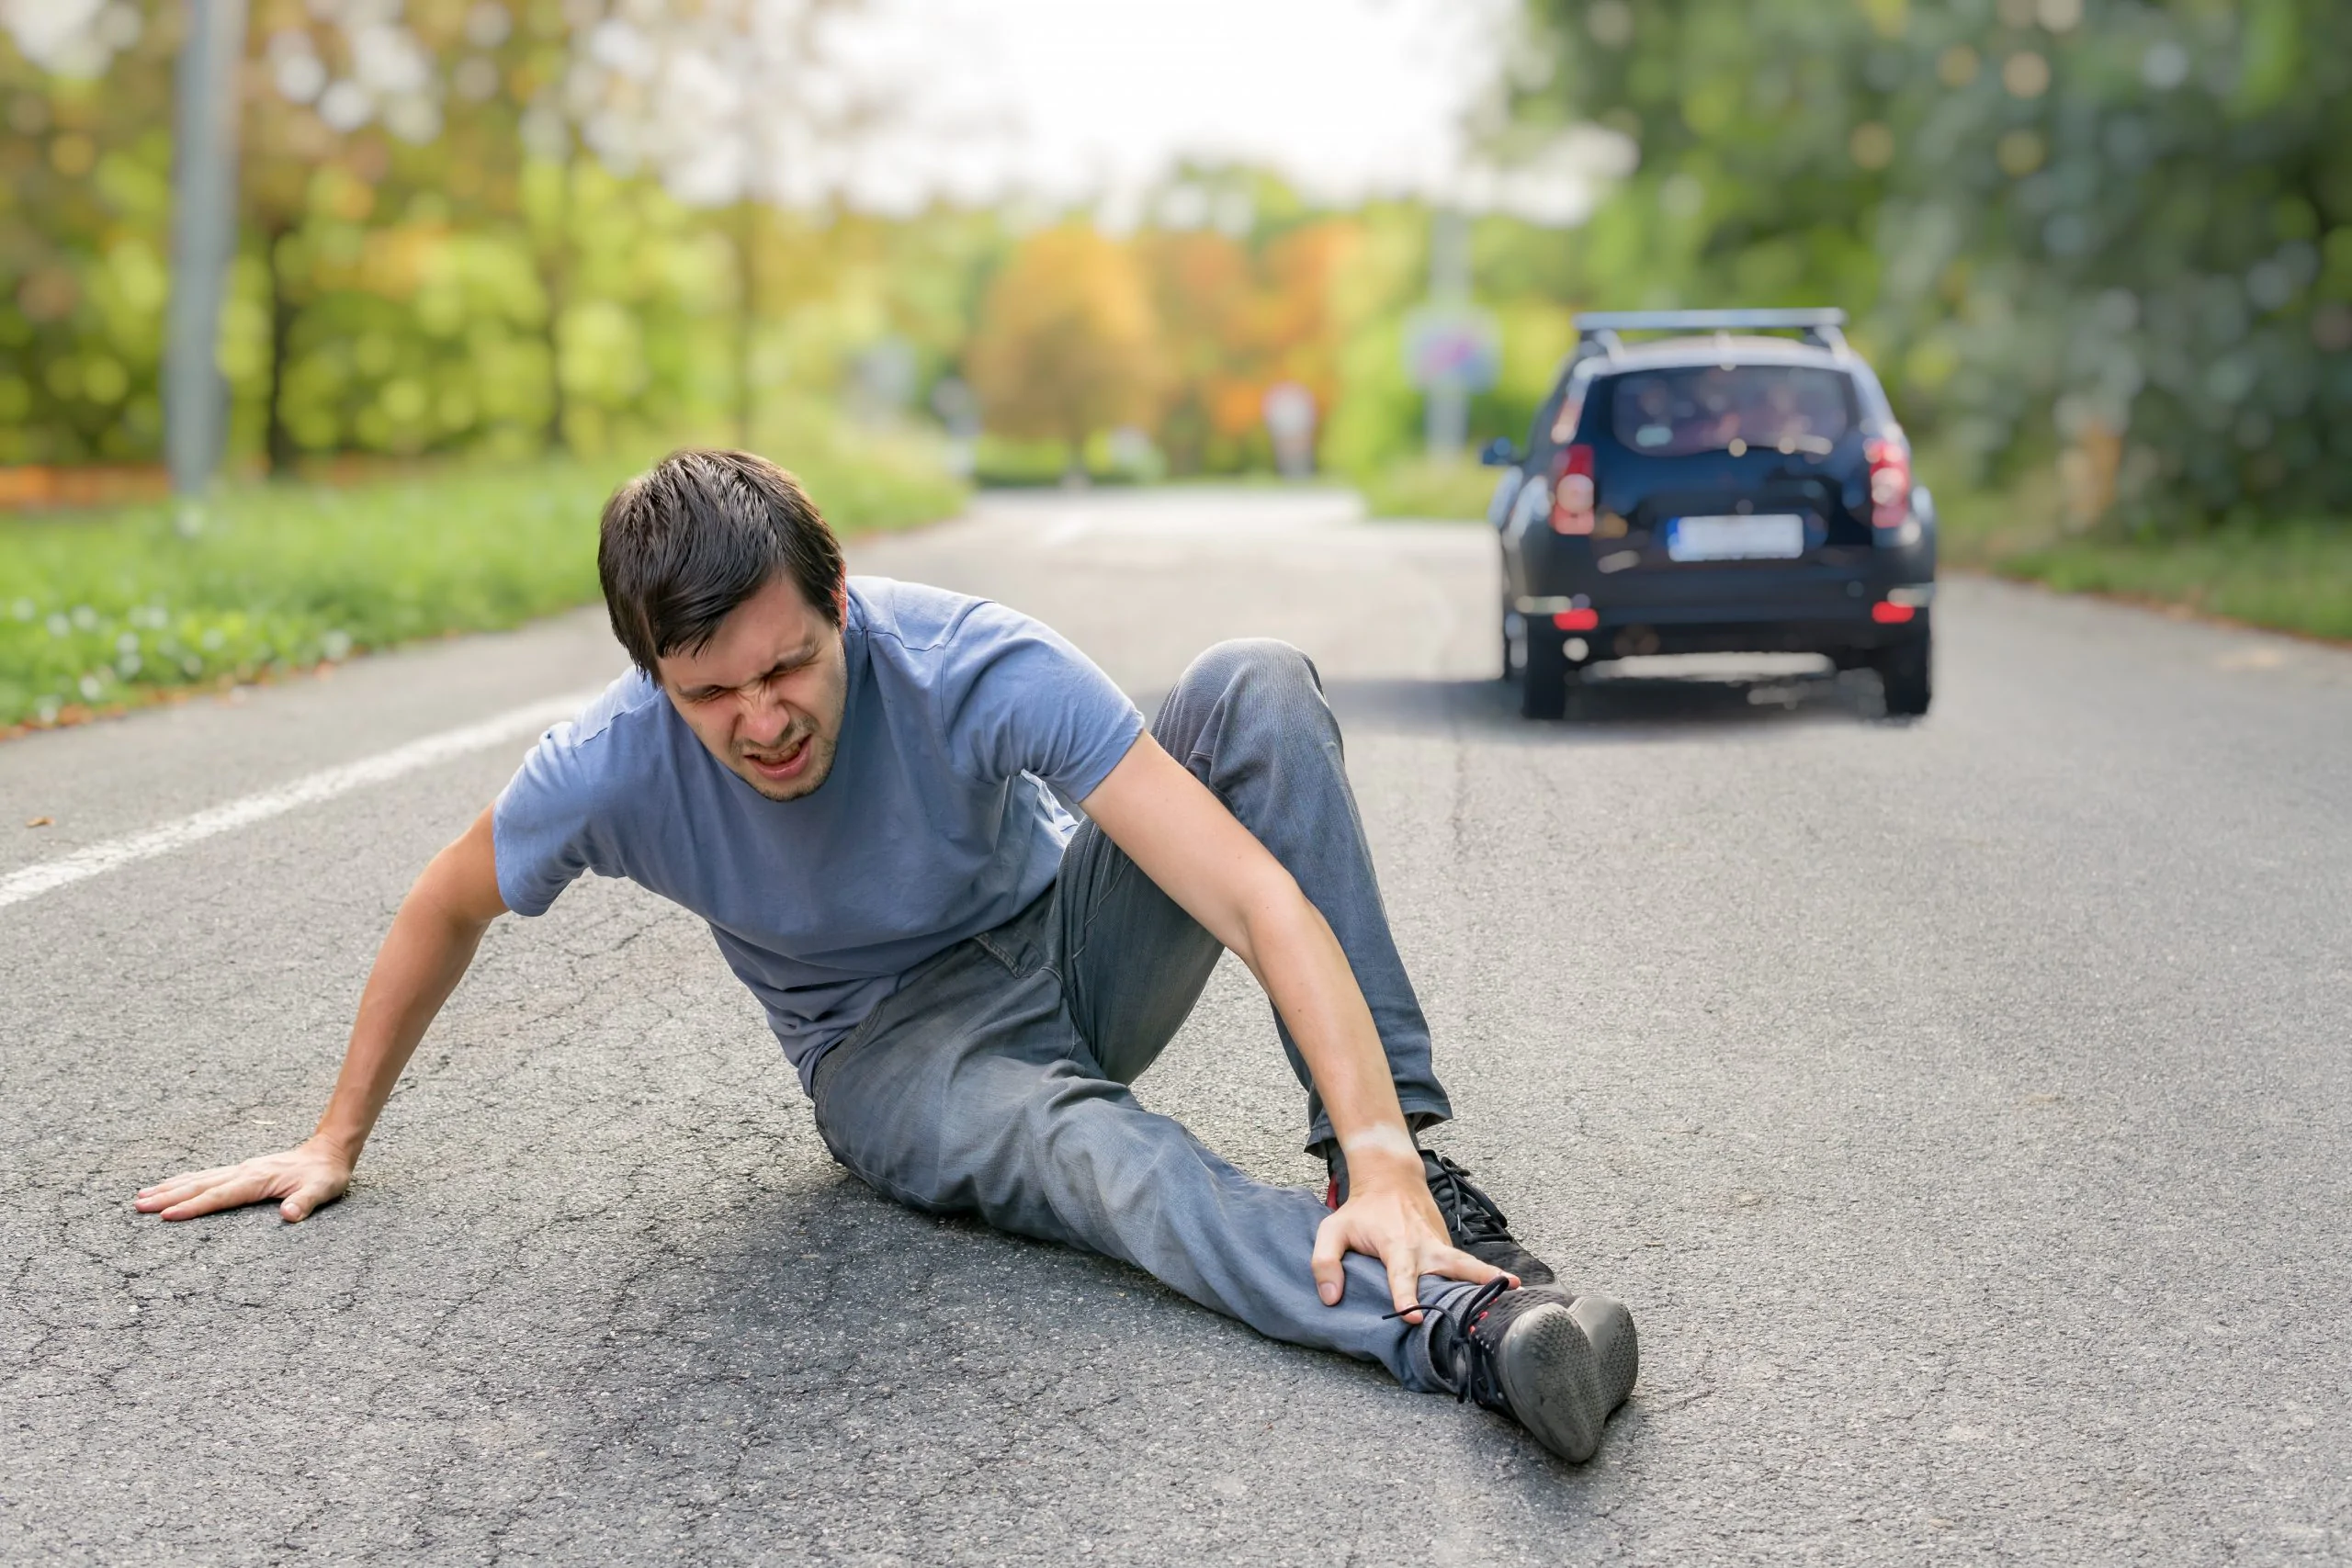 Hit and Runs in New York: What to Do if You’re a Victim